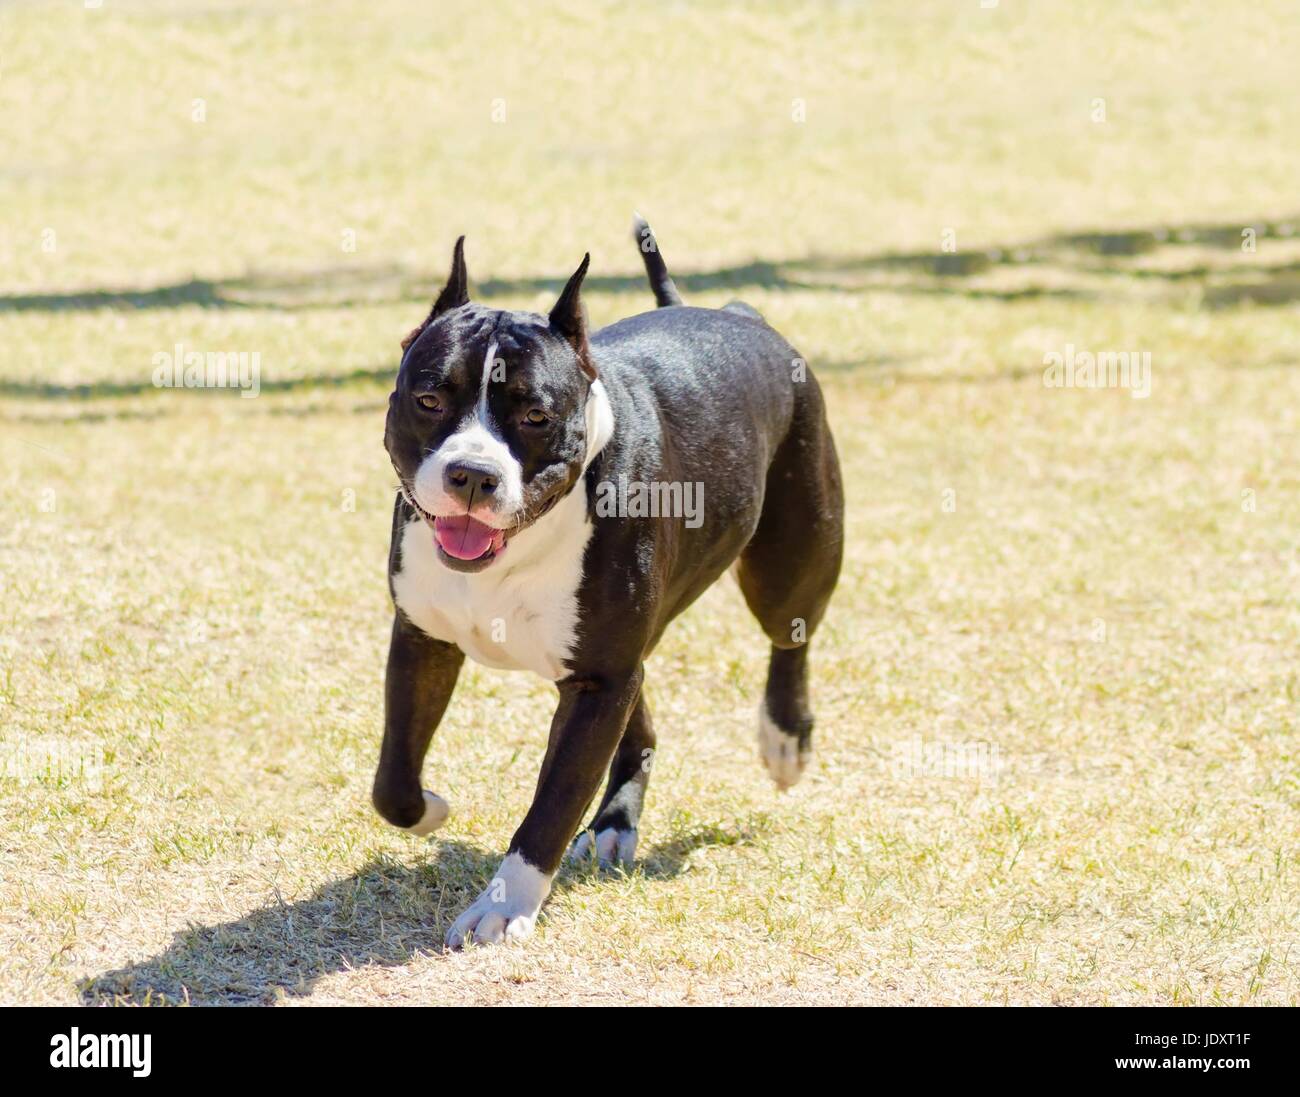 A small, young, beautiful, black and white American Staffordshire Terrier walking on the grass looking playful and cheerful. Its ears are cropped. Stock Photo